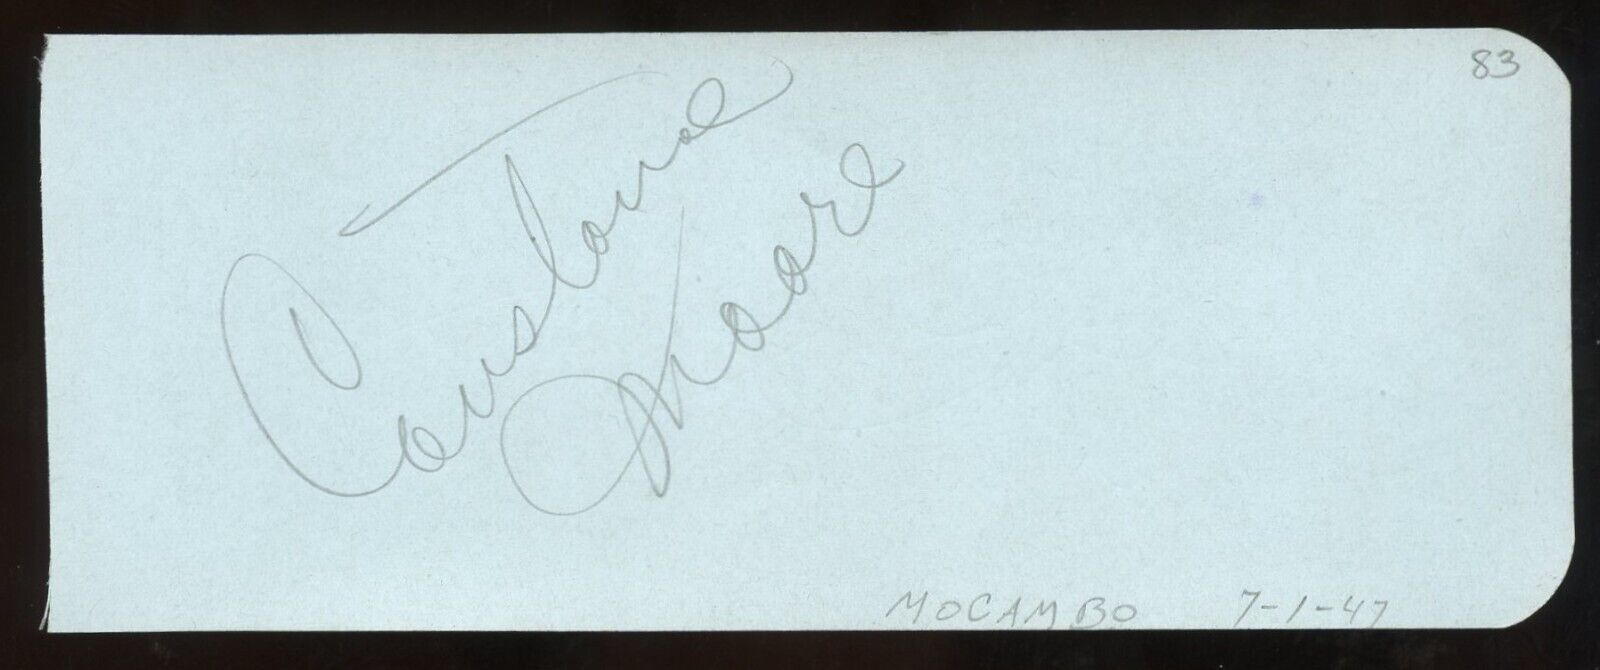 Constance Moore d2005 signed 2x5 cut autograph on 7-1-47 at Mocambo Theater LA